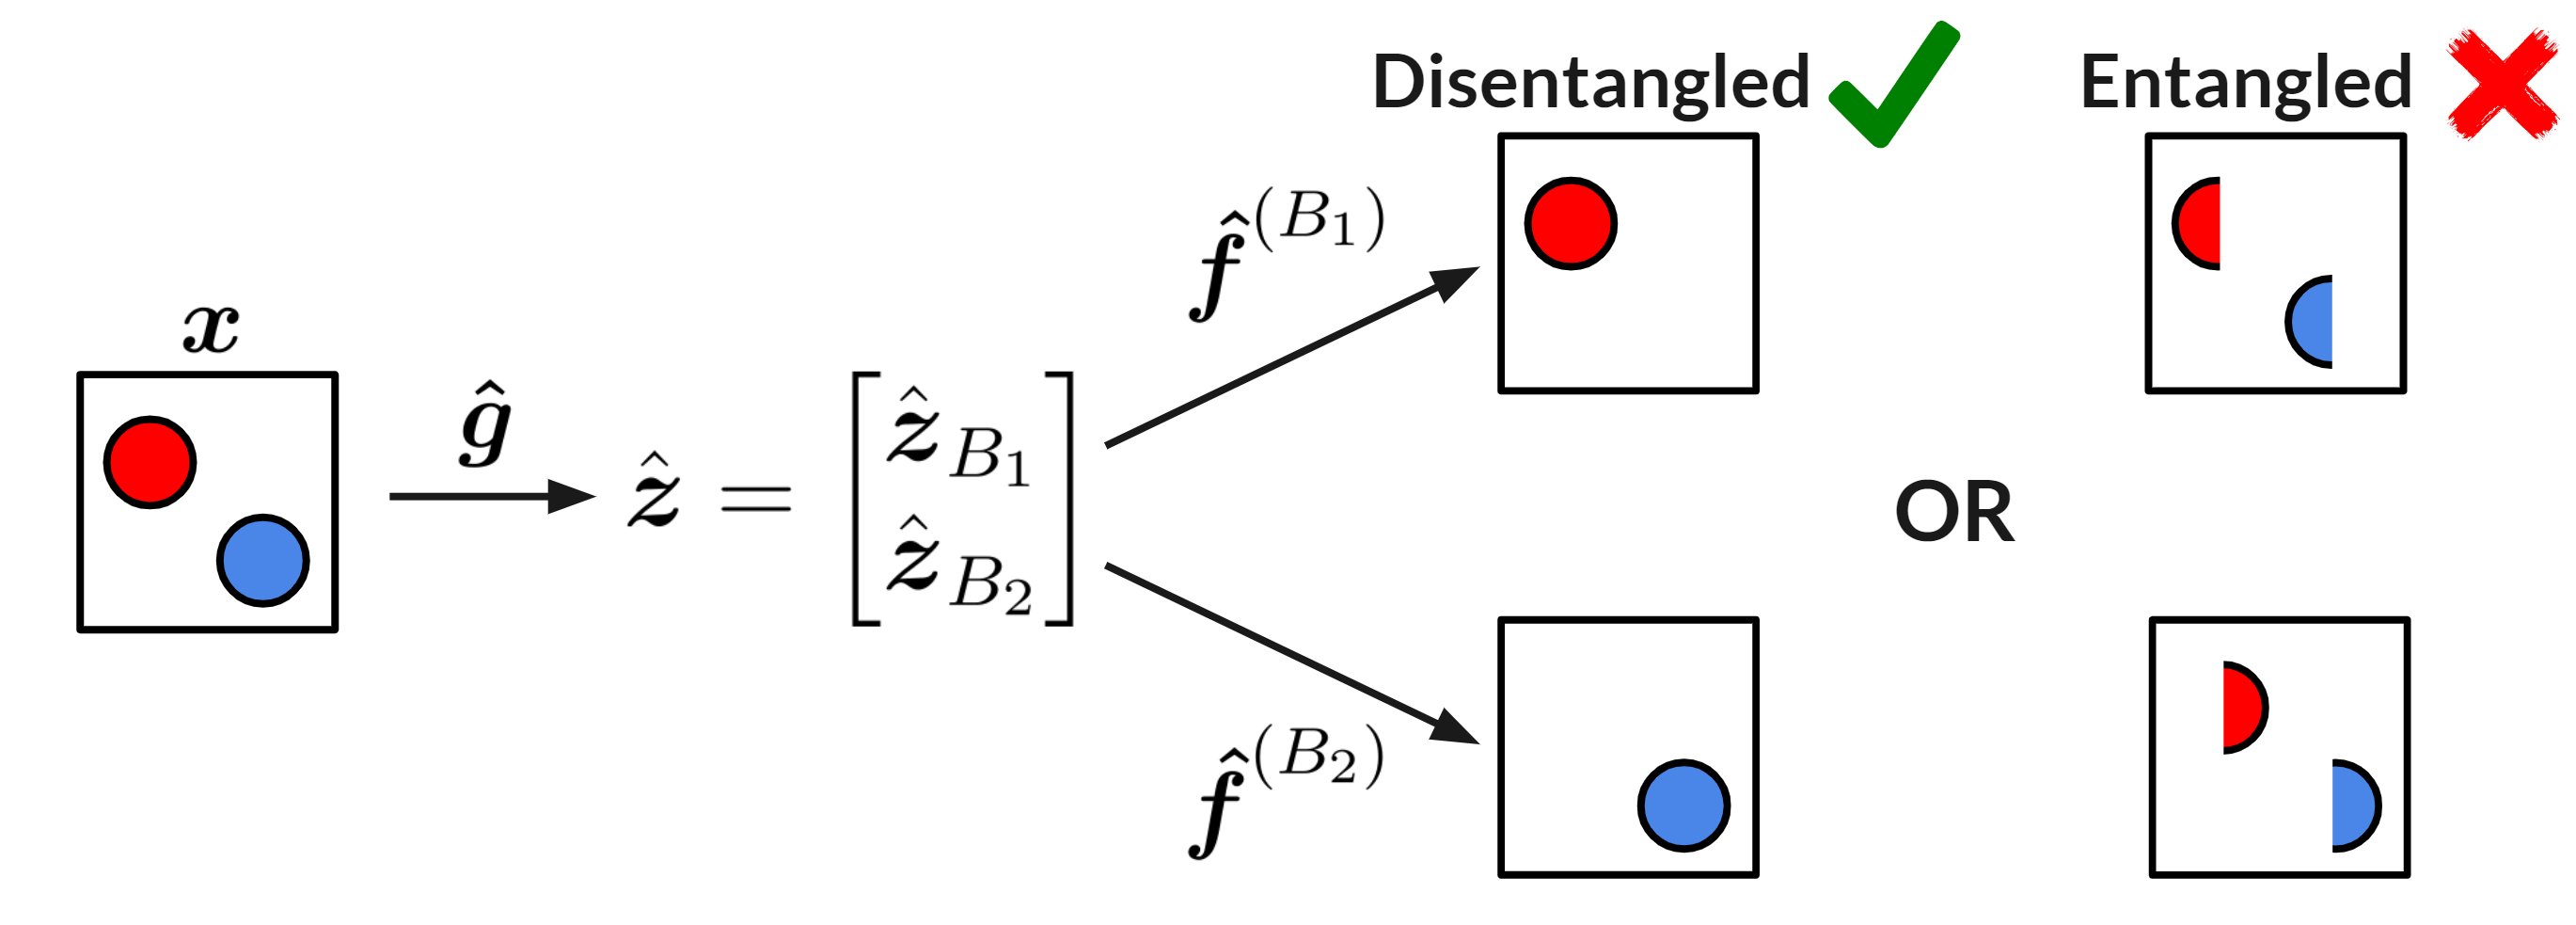 [Figure 4: Depicting the intuition behind block disentanglement, such that rendering each latent block leads to a unique object.]